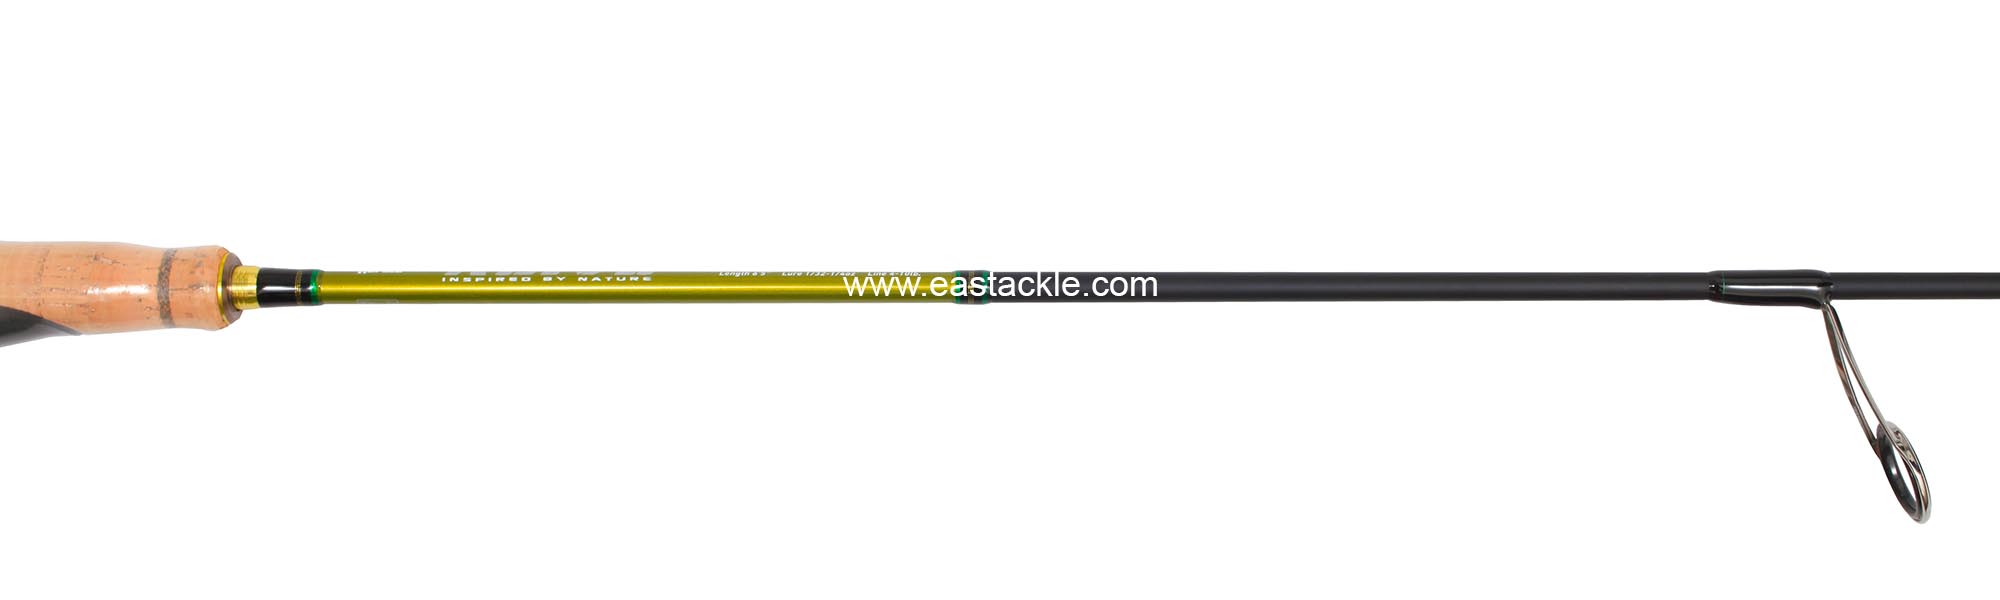 Rapala - Koivu - KVS662MH - Spinning Rod - Fore Grip to Stripper Guide (Side View) | Eastackle